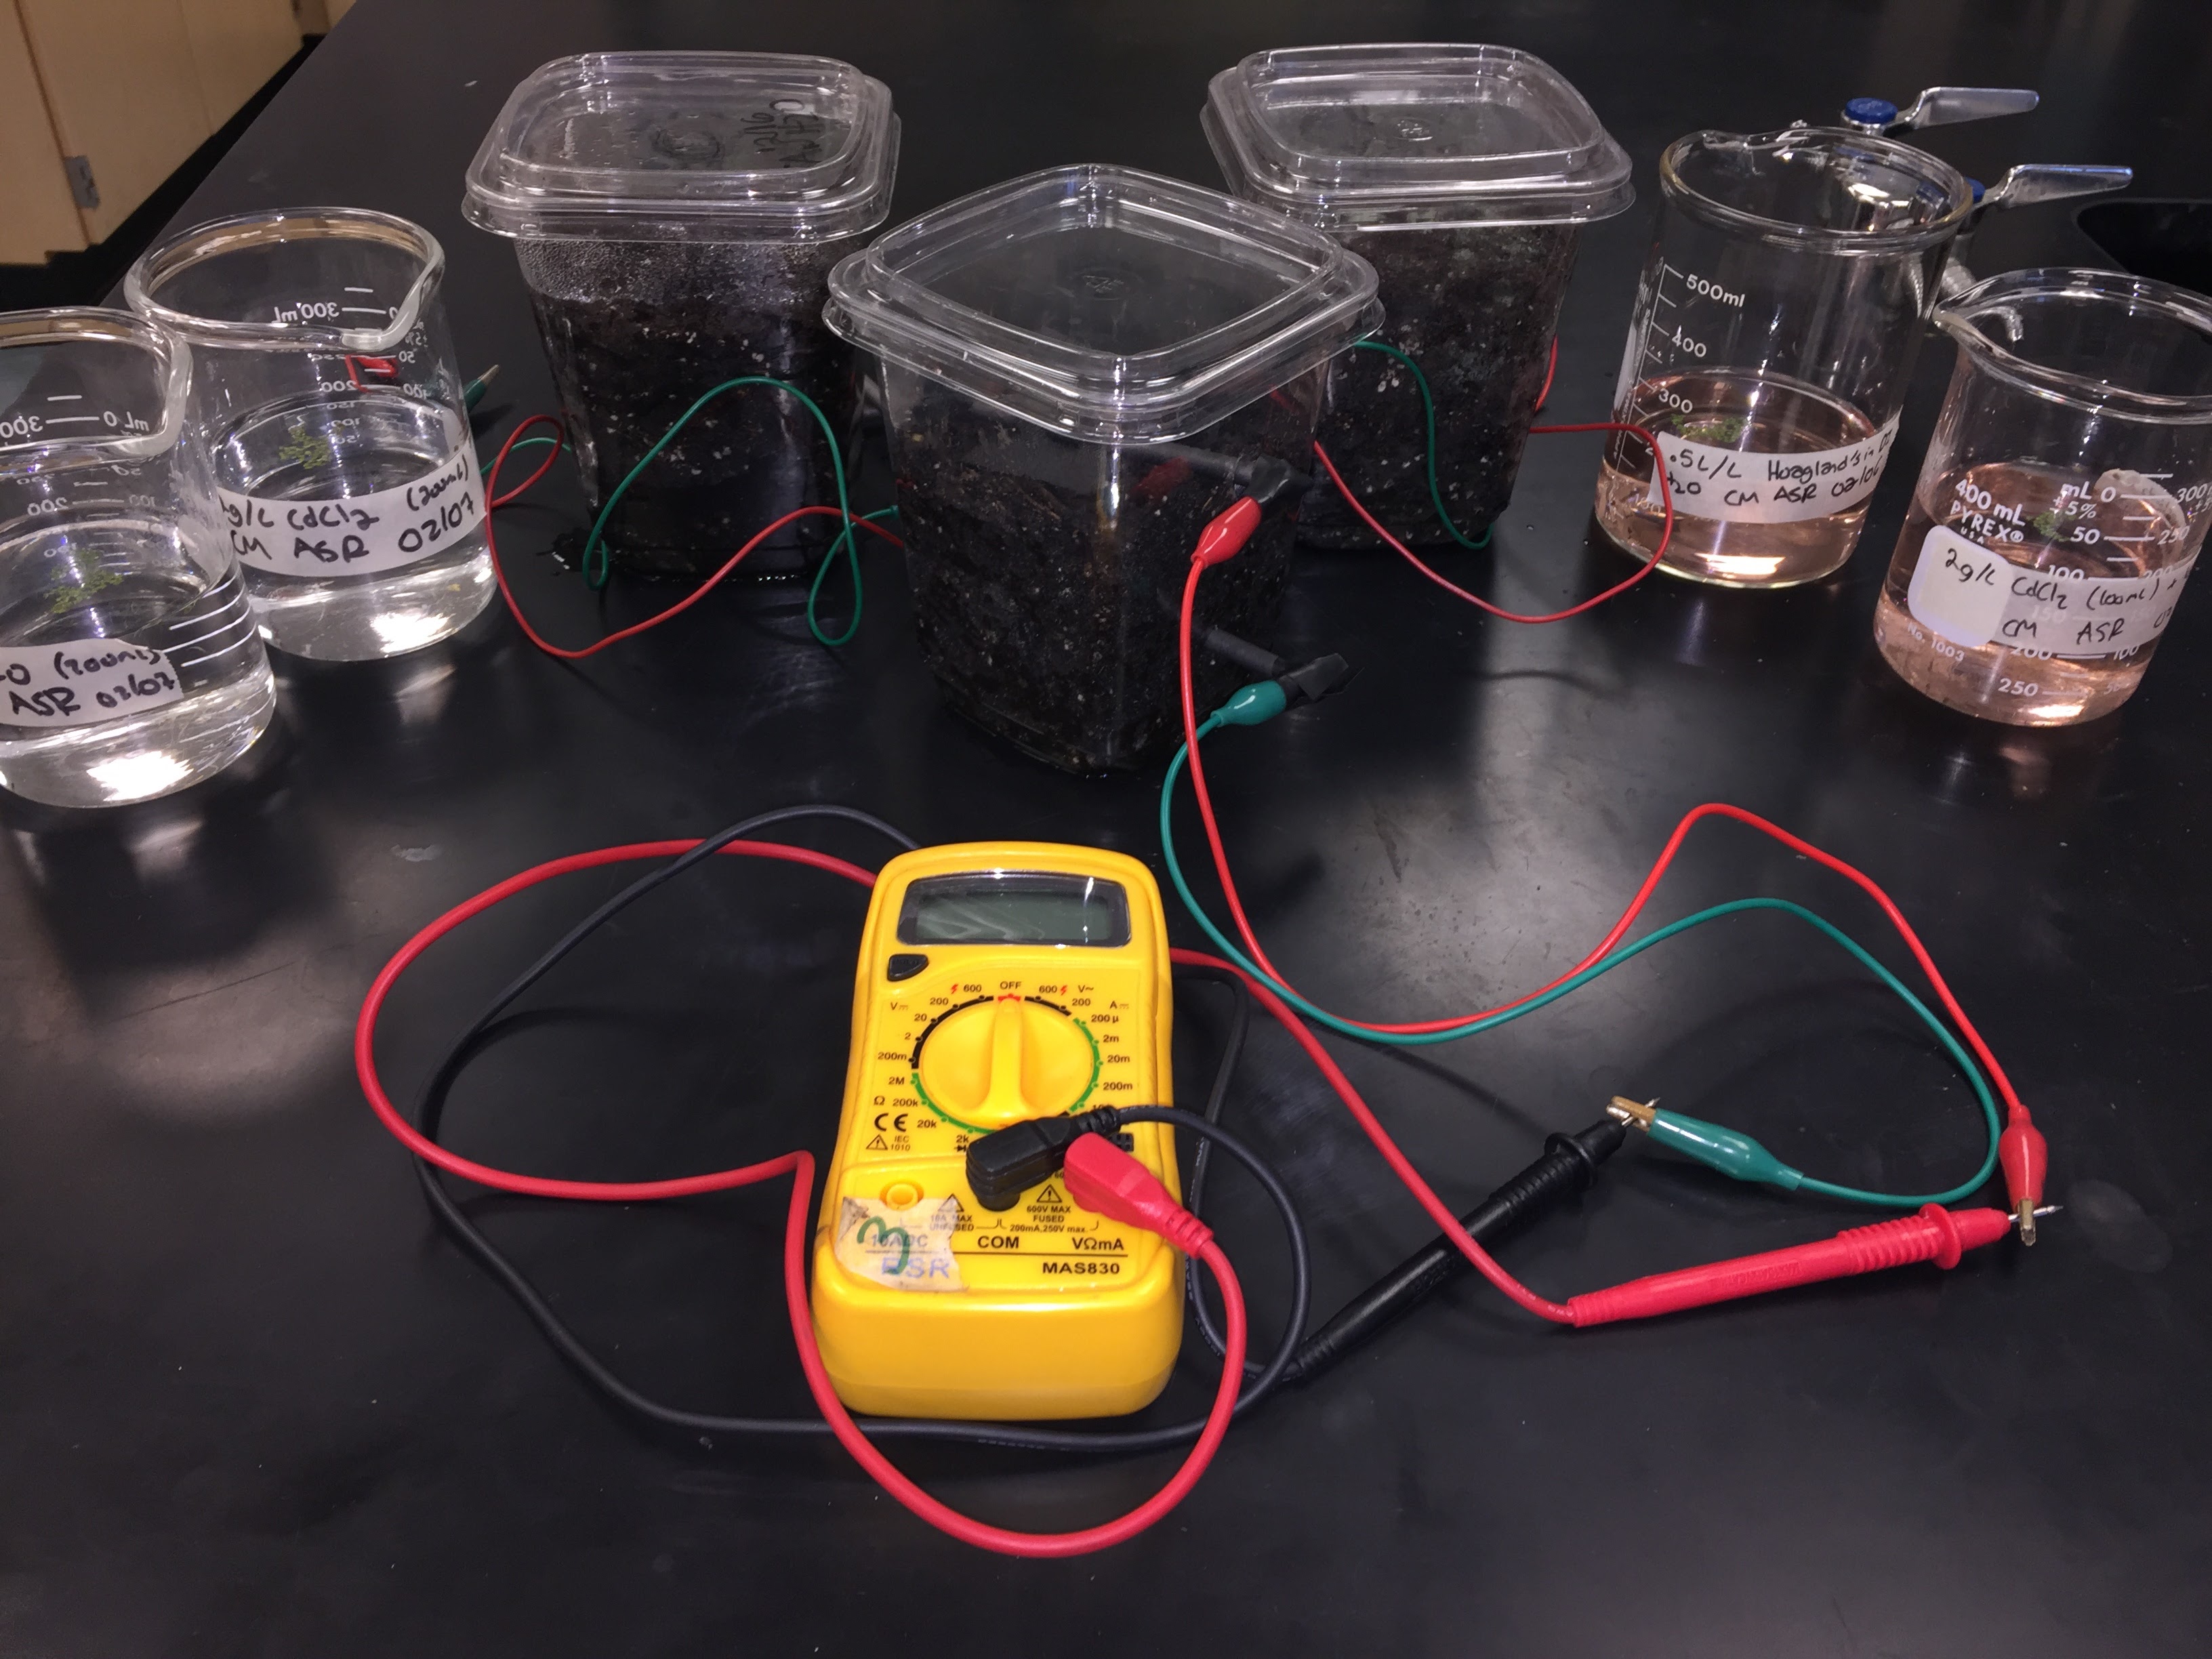 Homemade Microbial Fuel Cells and Renewable Energy